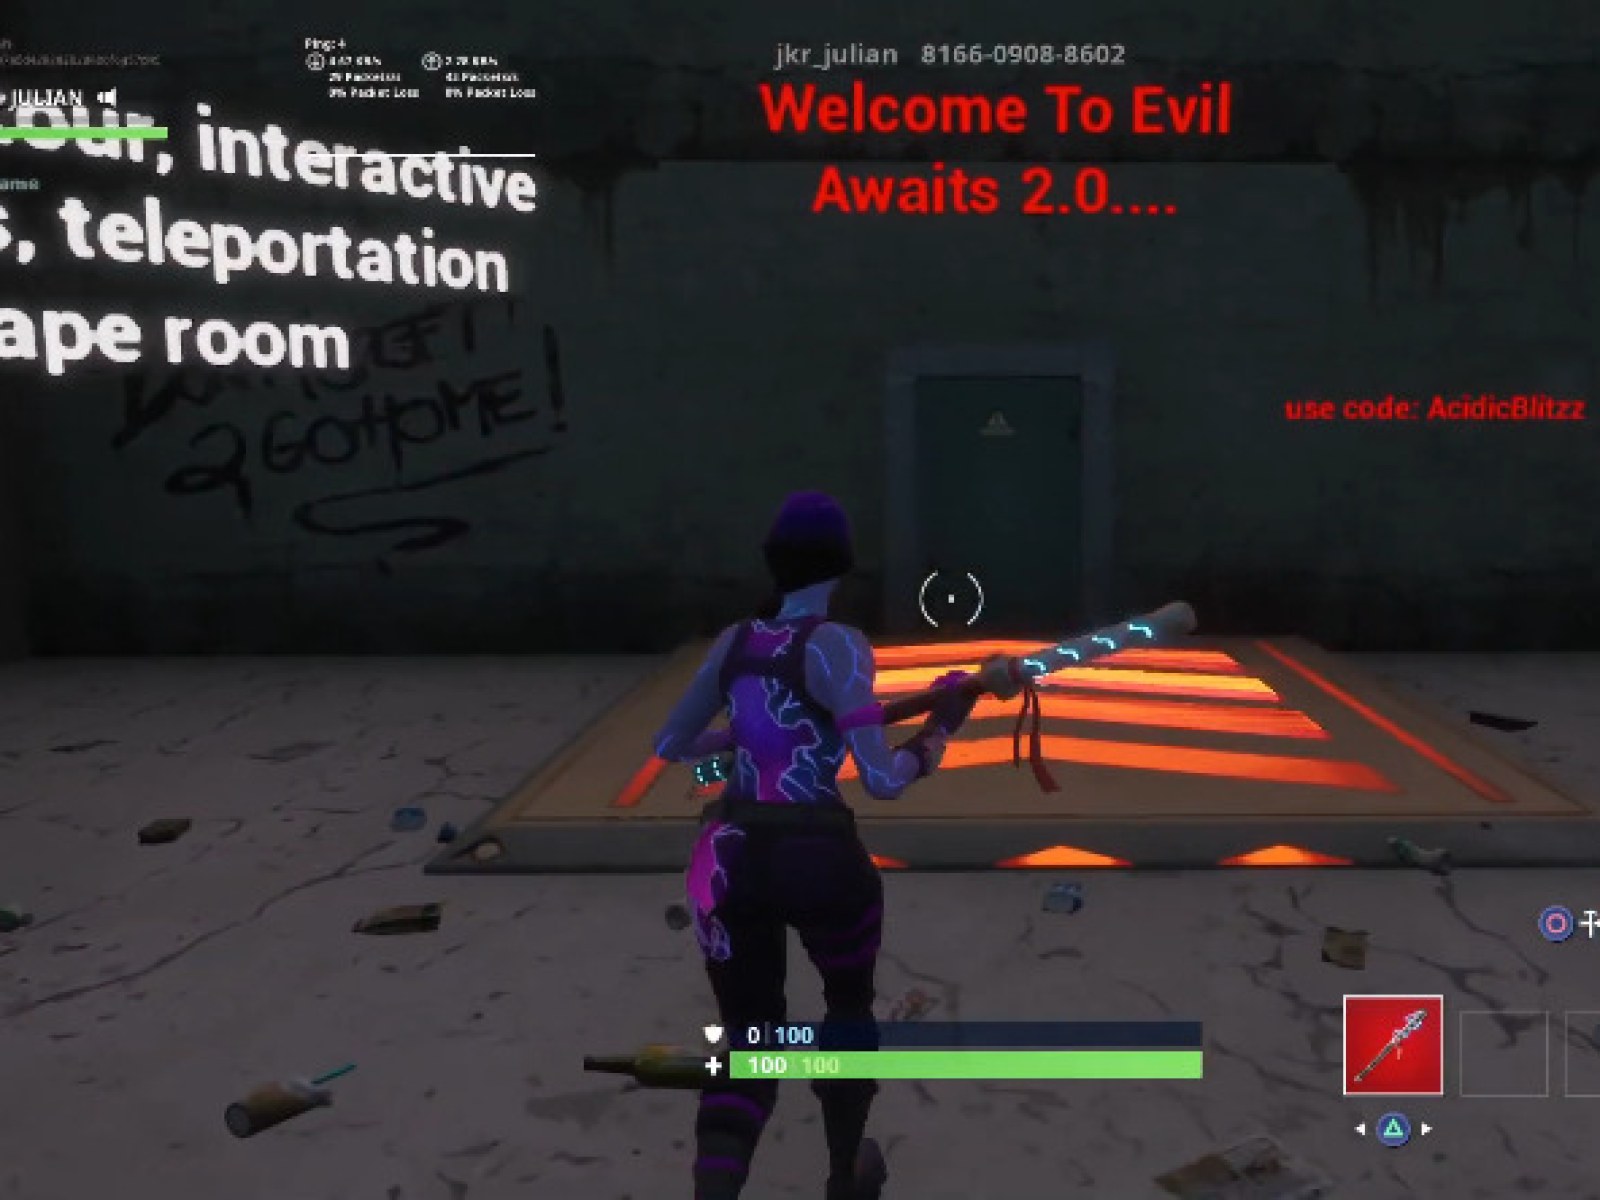 The Backroom - Fortnite Creative Escape and Horror Map Code